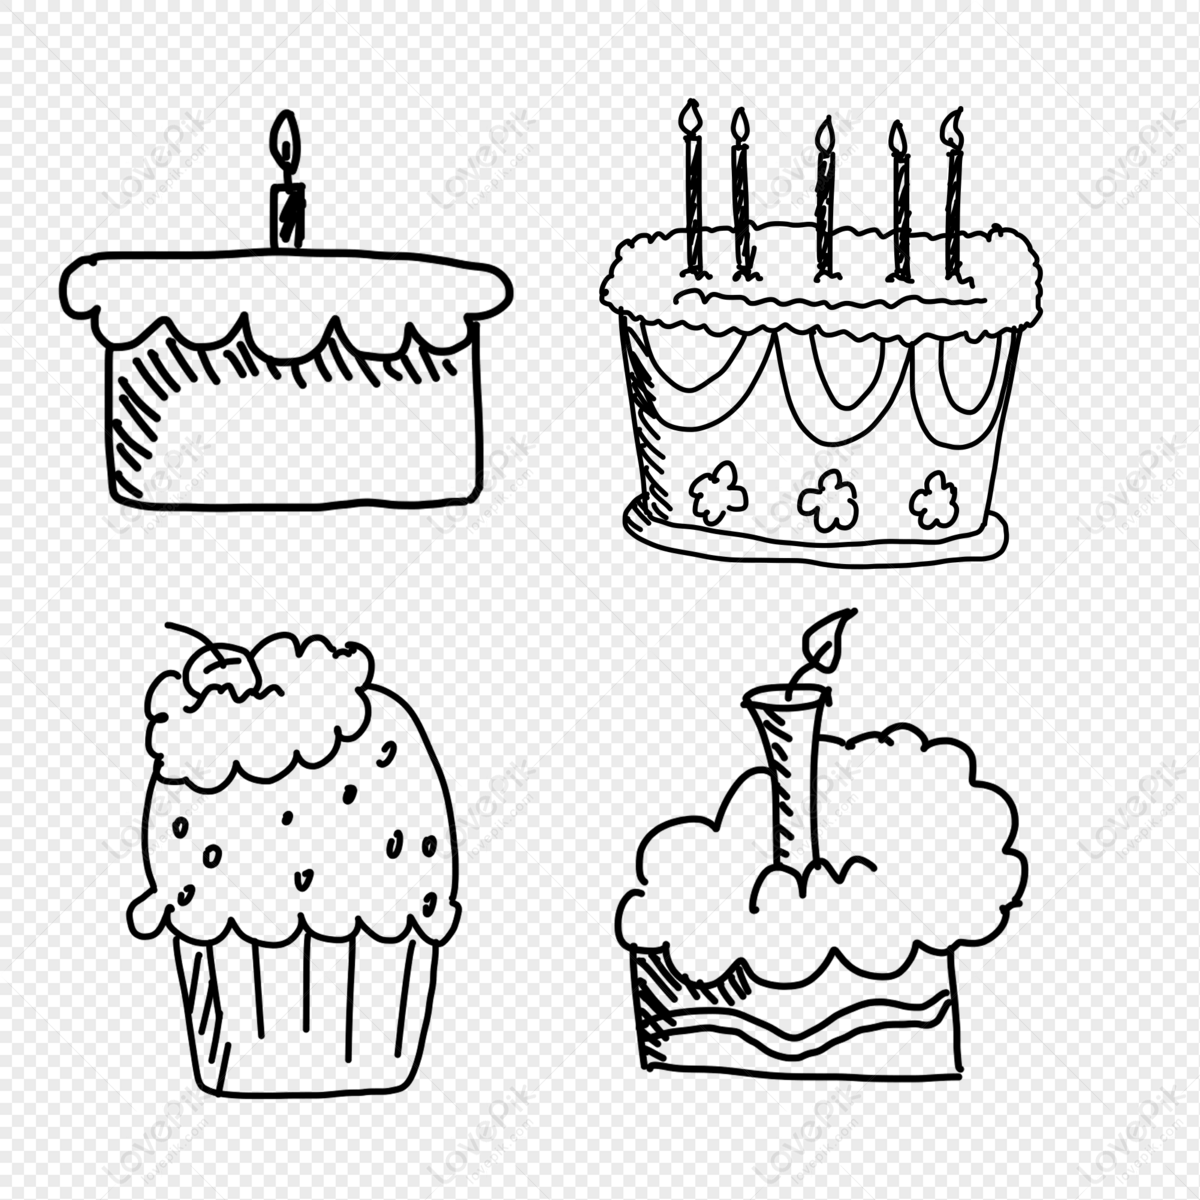 Premium Vector | Cake sketch with candle on white background vector